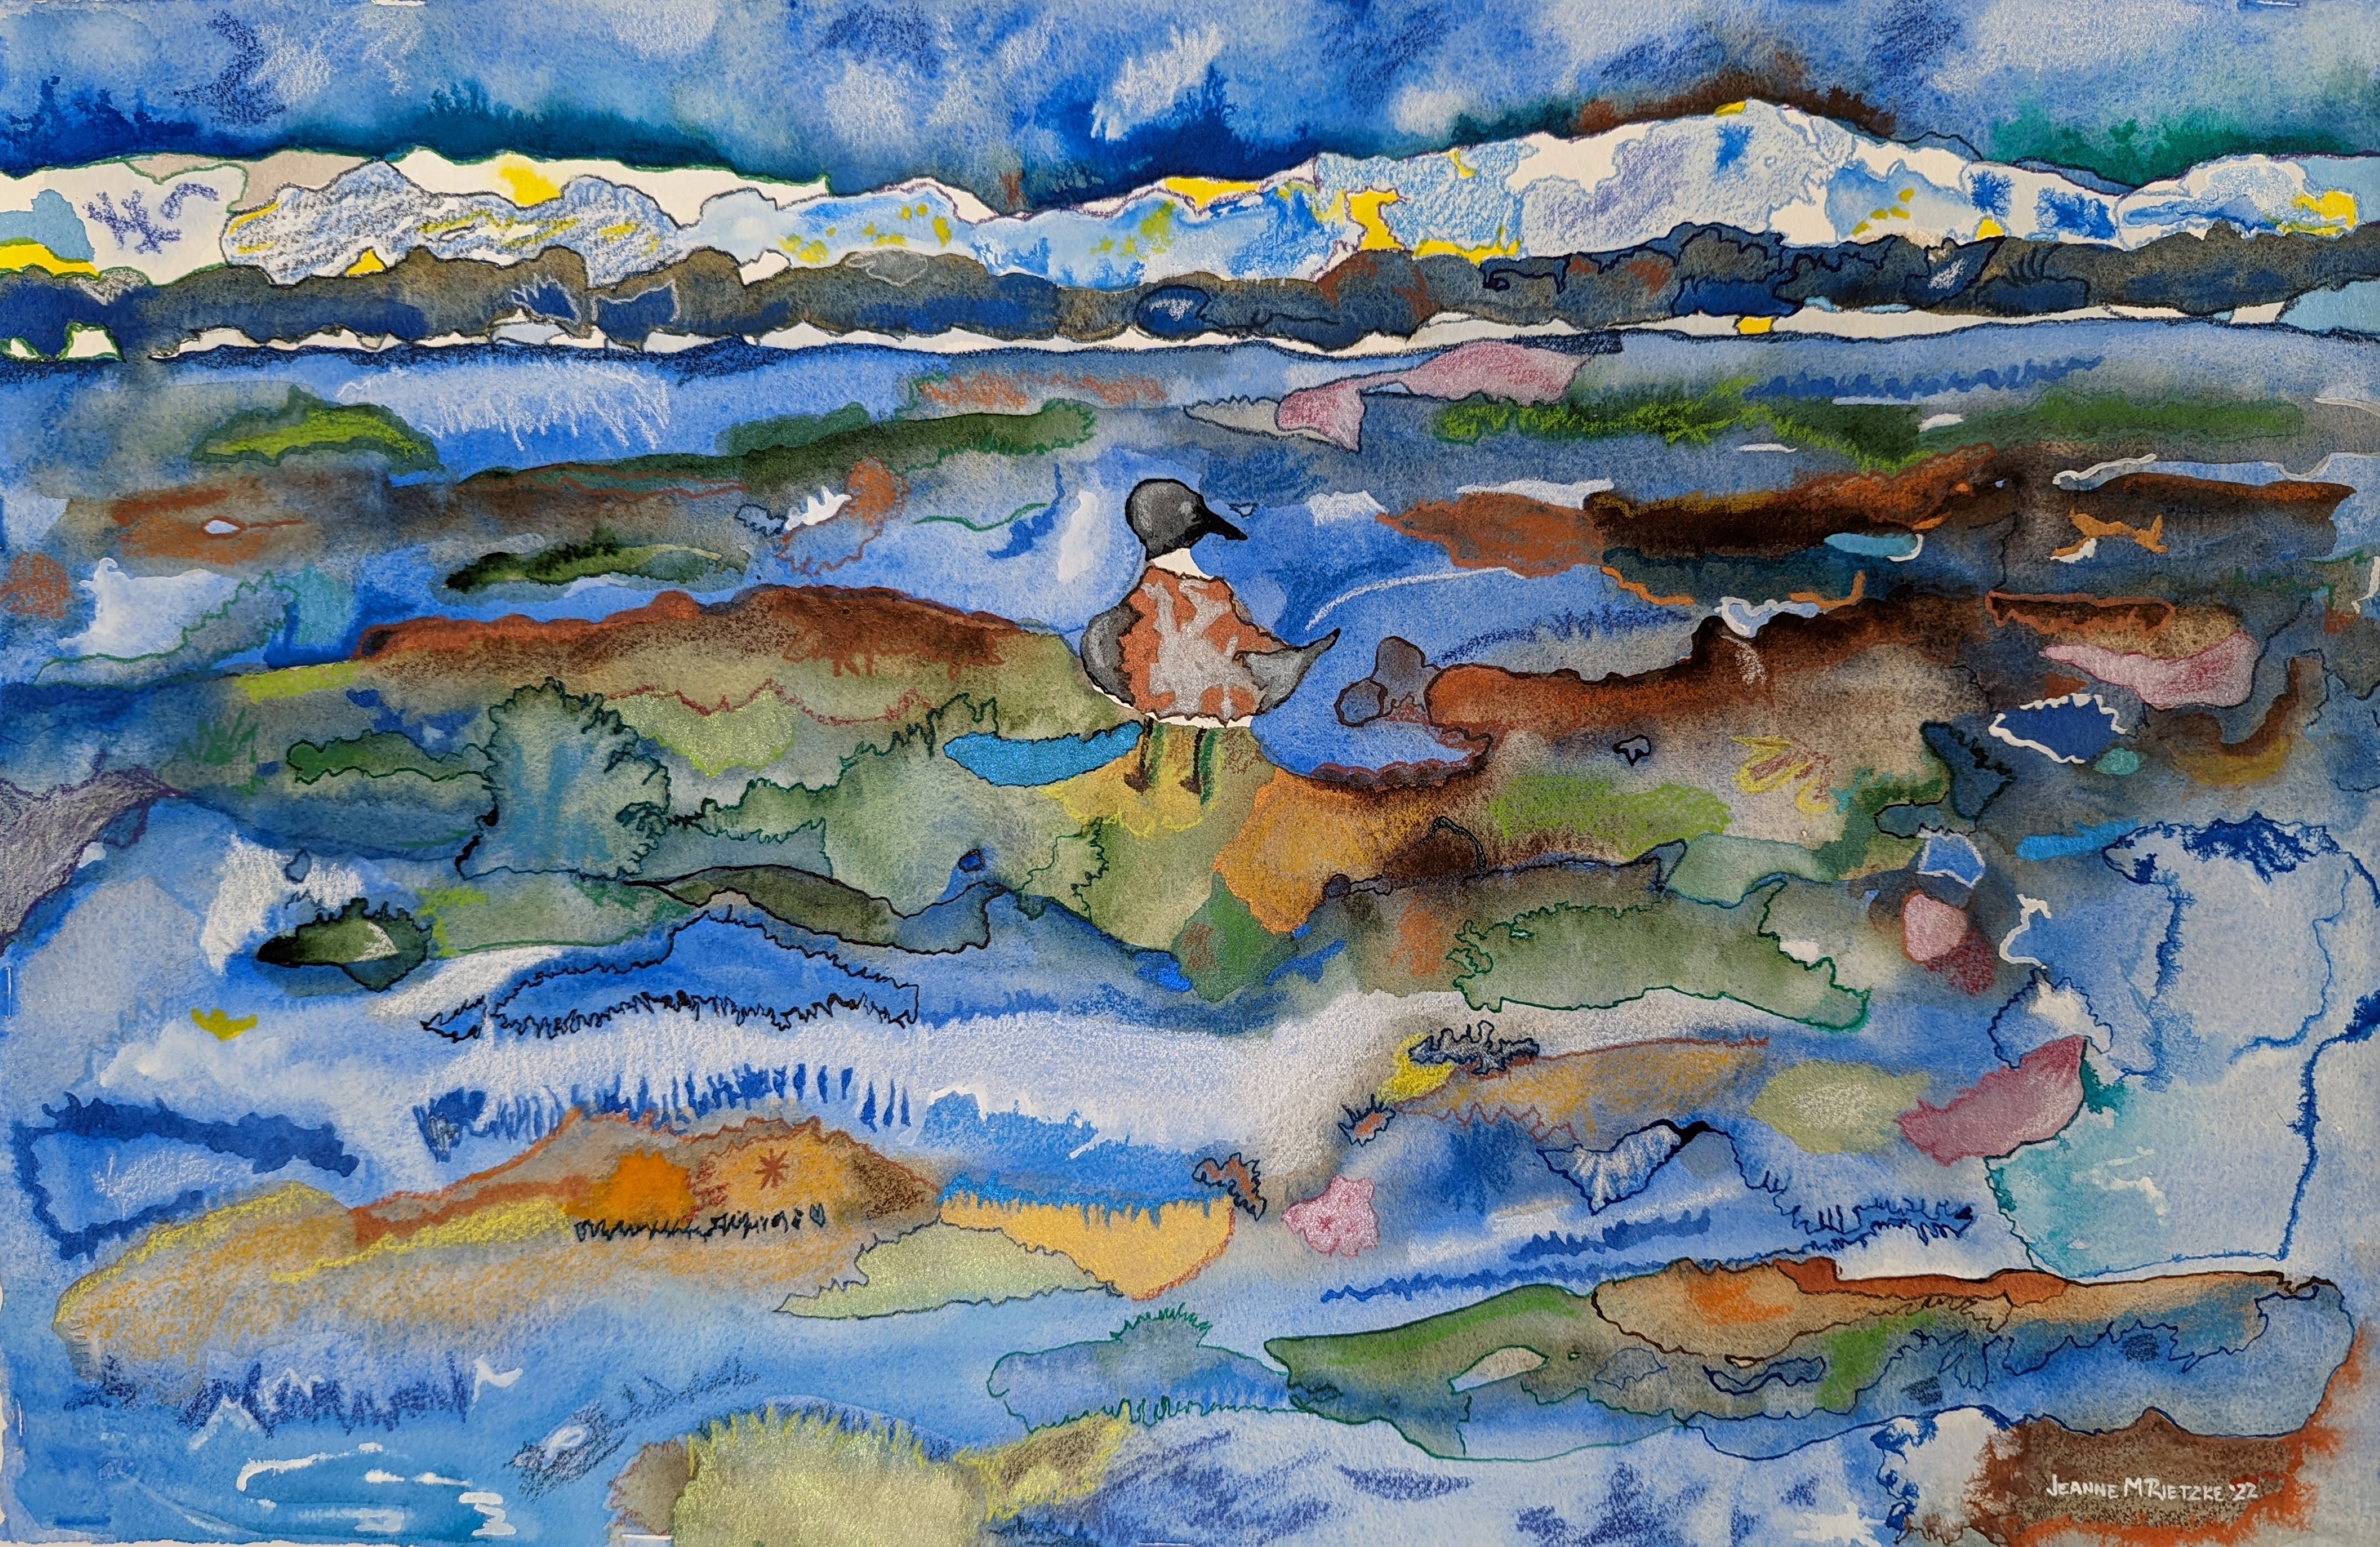 'LOW TIDE' - Watercolor, Ink, and Pencil on paper